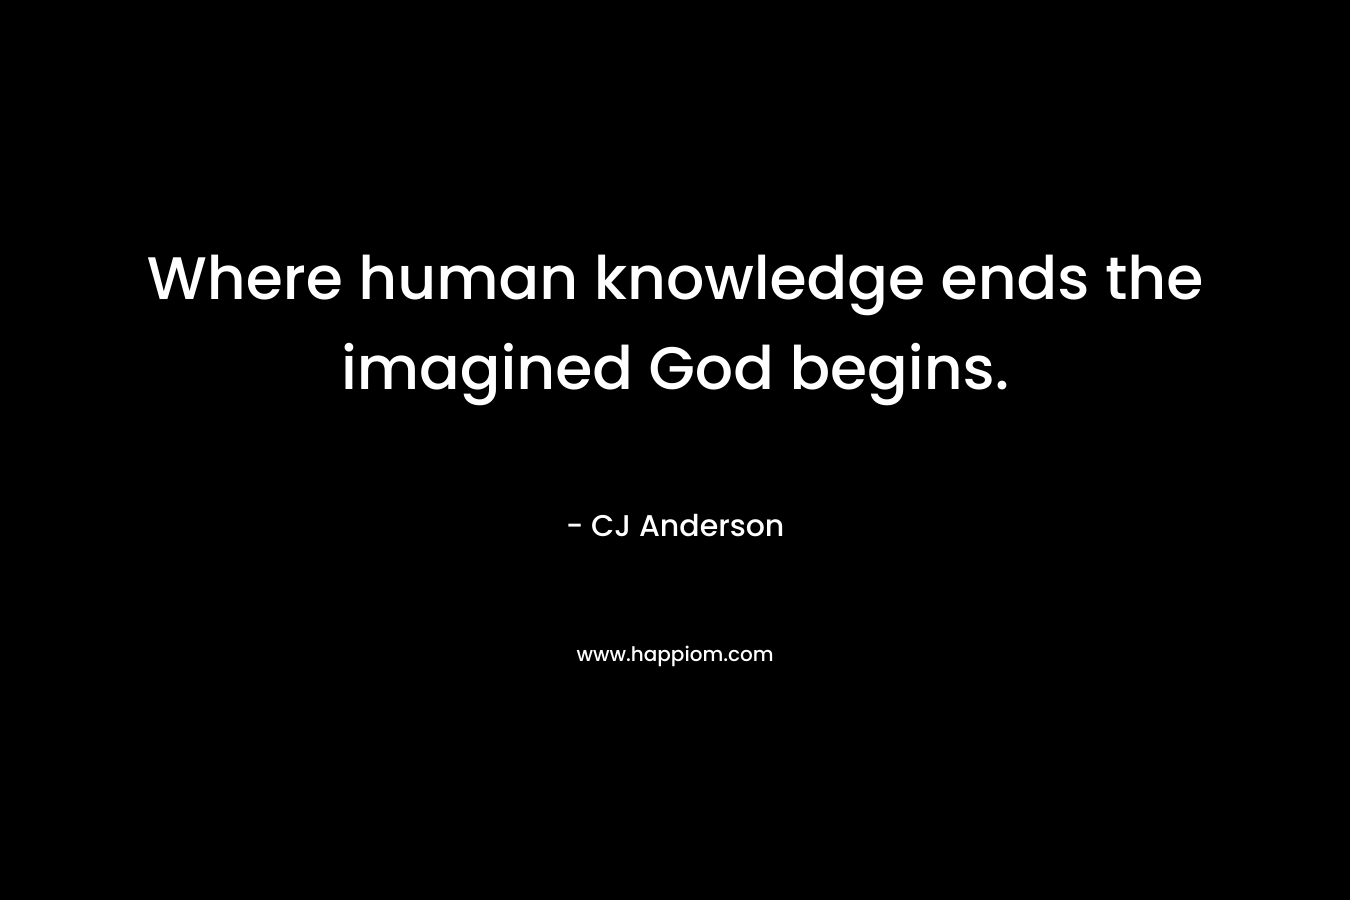 Where human knowledge ends the imagined God begins.